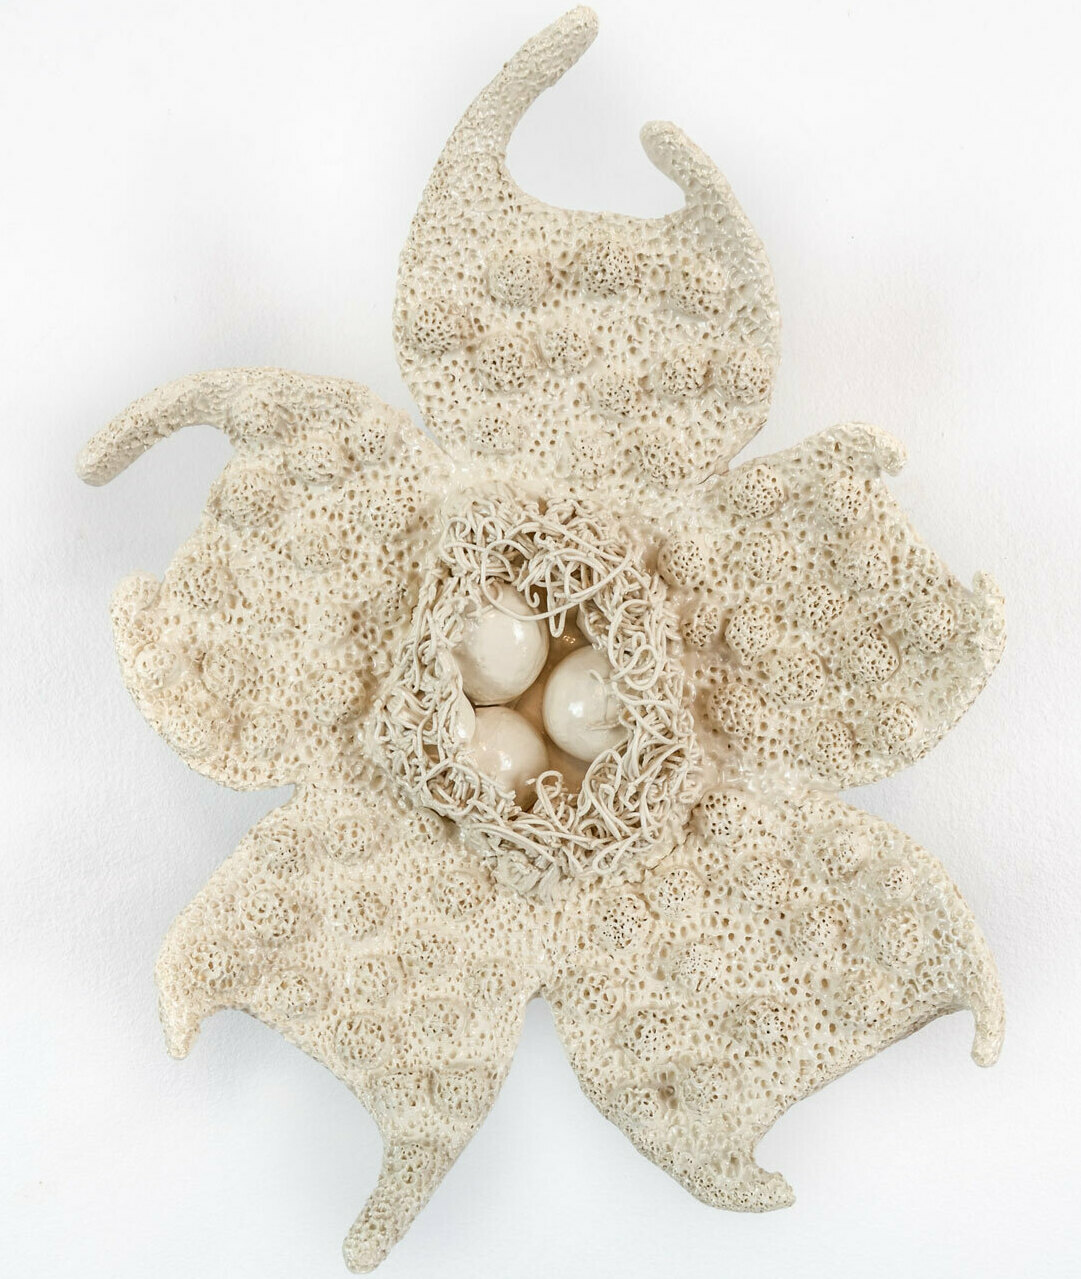 Detailed ceramic wall sculpture depicting the cellular structure of an Euphorbia Flower as seen through a micrograph, with an emphasis on organic forms, intricate patterns and textures. 